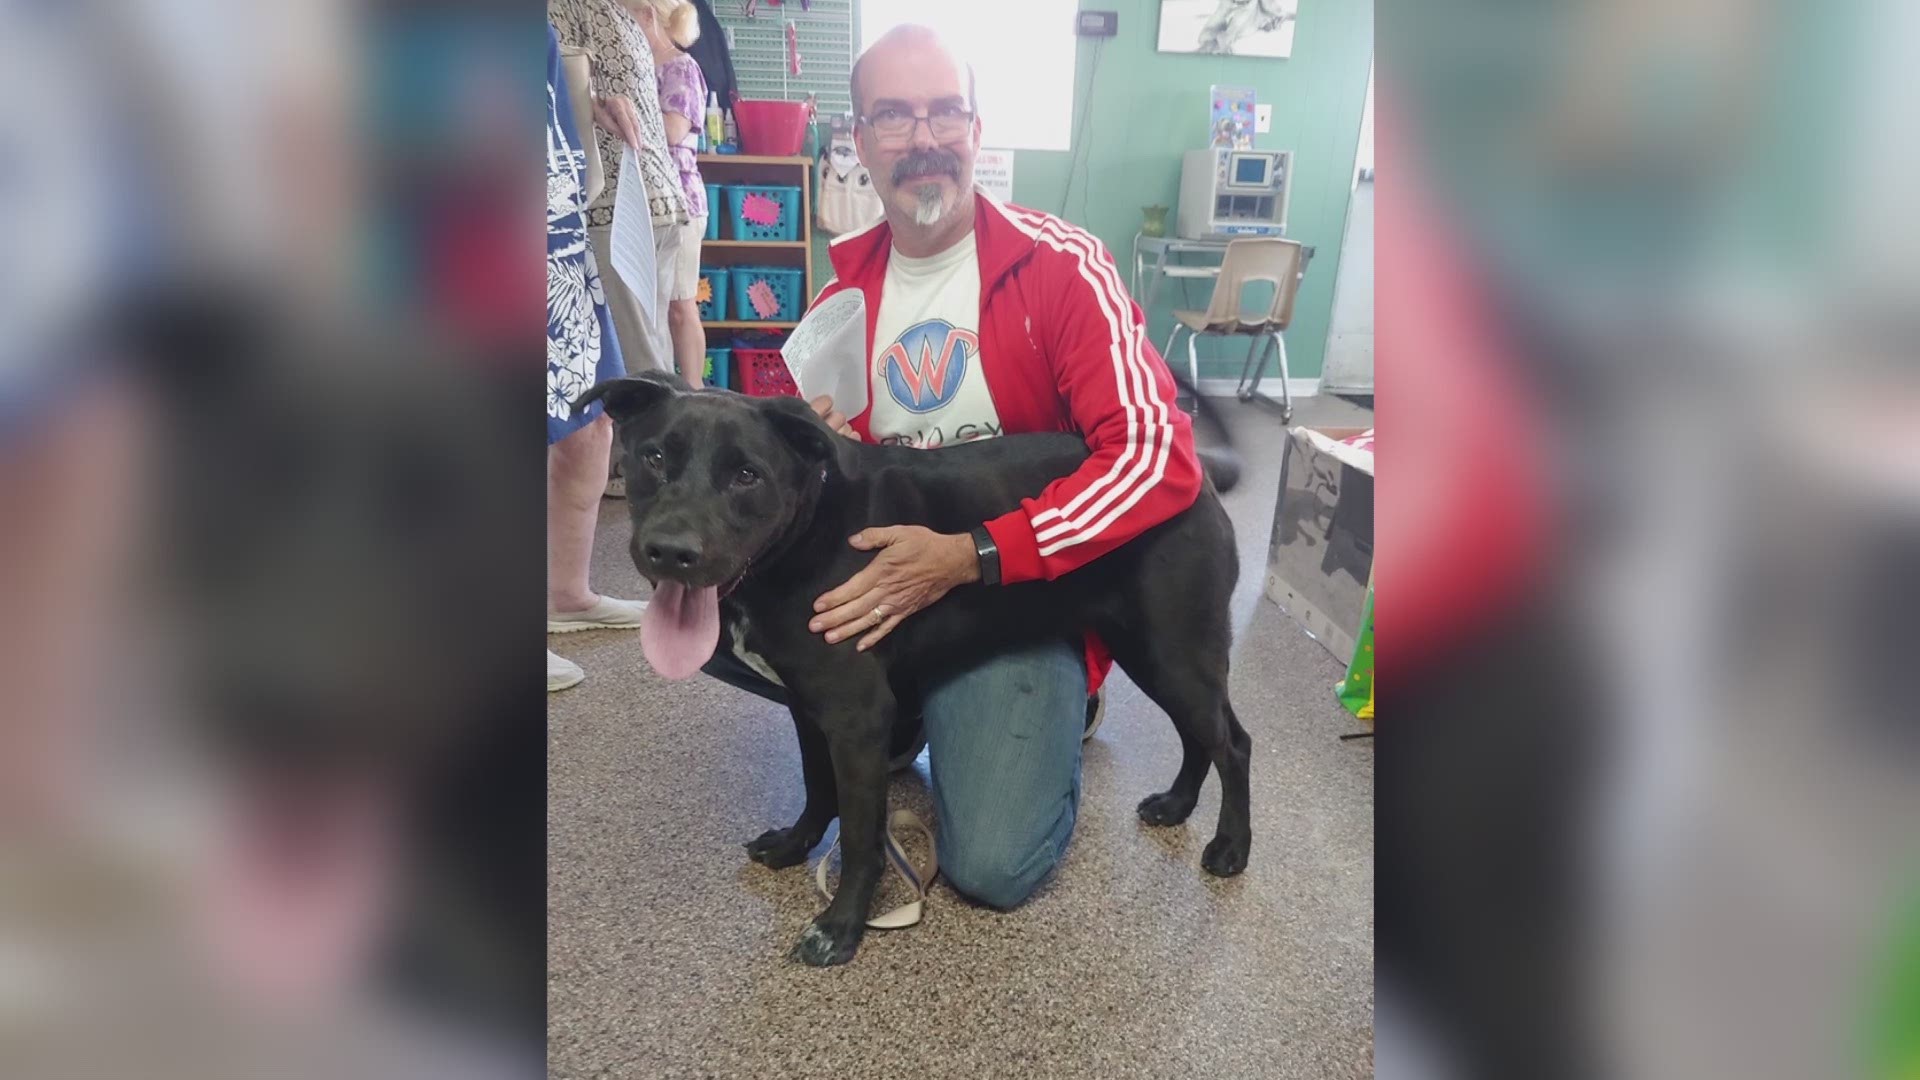 A family fostered Buddy for a day, and when they went back home to New Hampshire they couldn't stop thinking about him. So, the dad drove 13 hours back to Outer Banks to pick Buddy up.